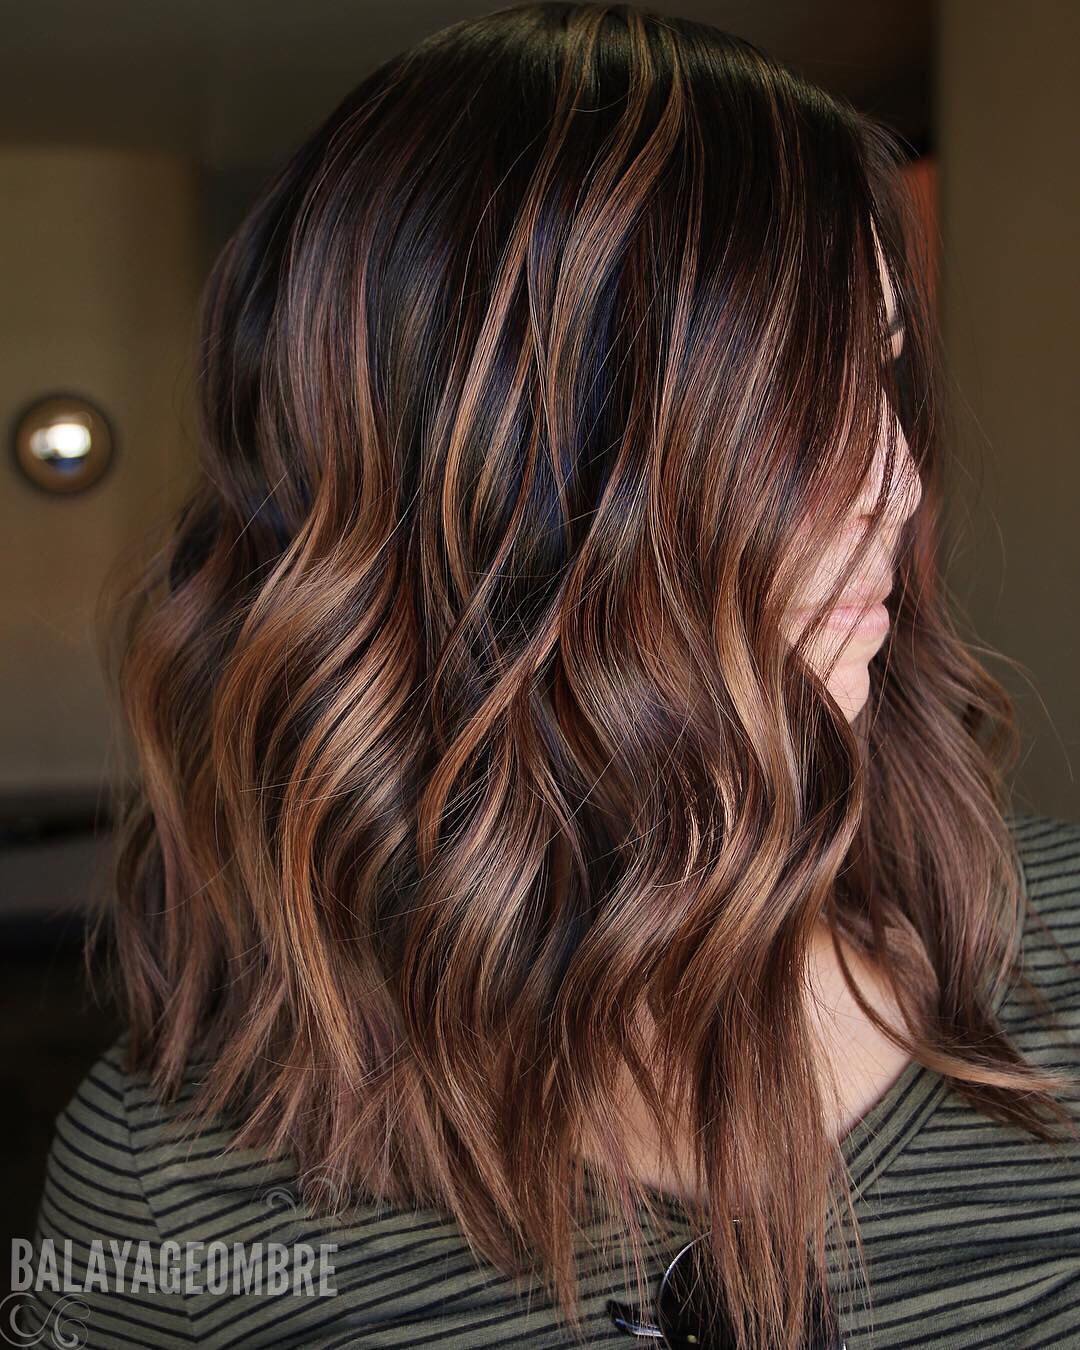 10 Balayage Ombre Long Hair Styles From Subtle To Stunning